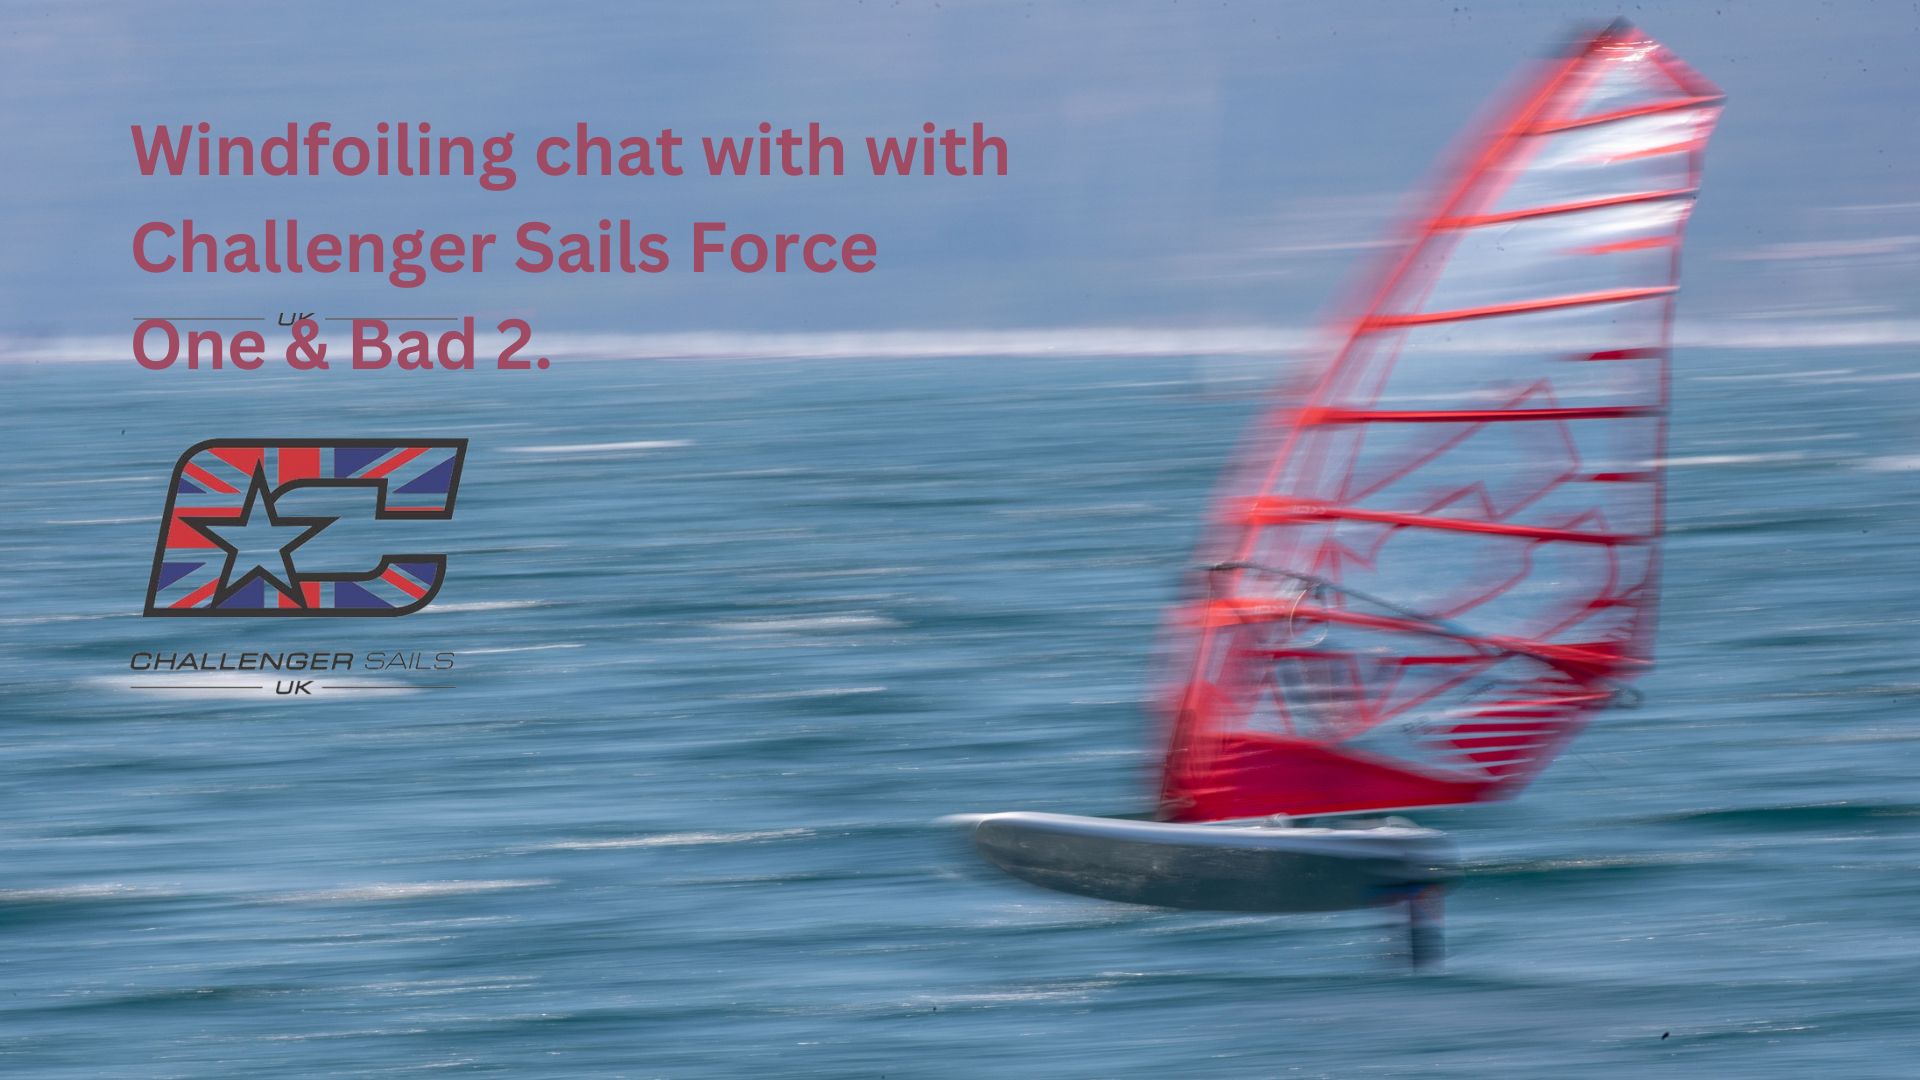 Windfoiling chat with Challenger Sails Force One & Bad 2.